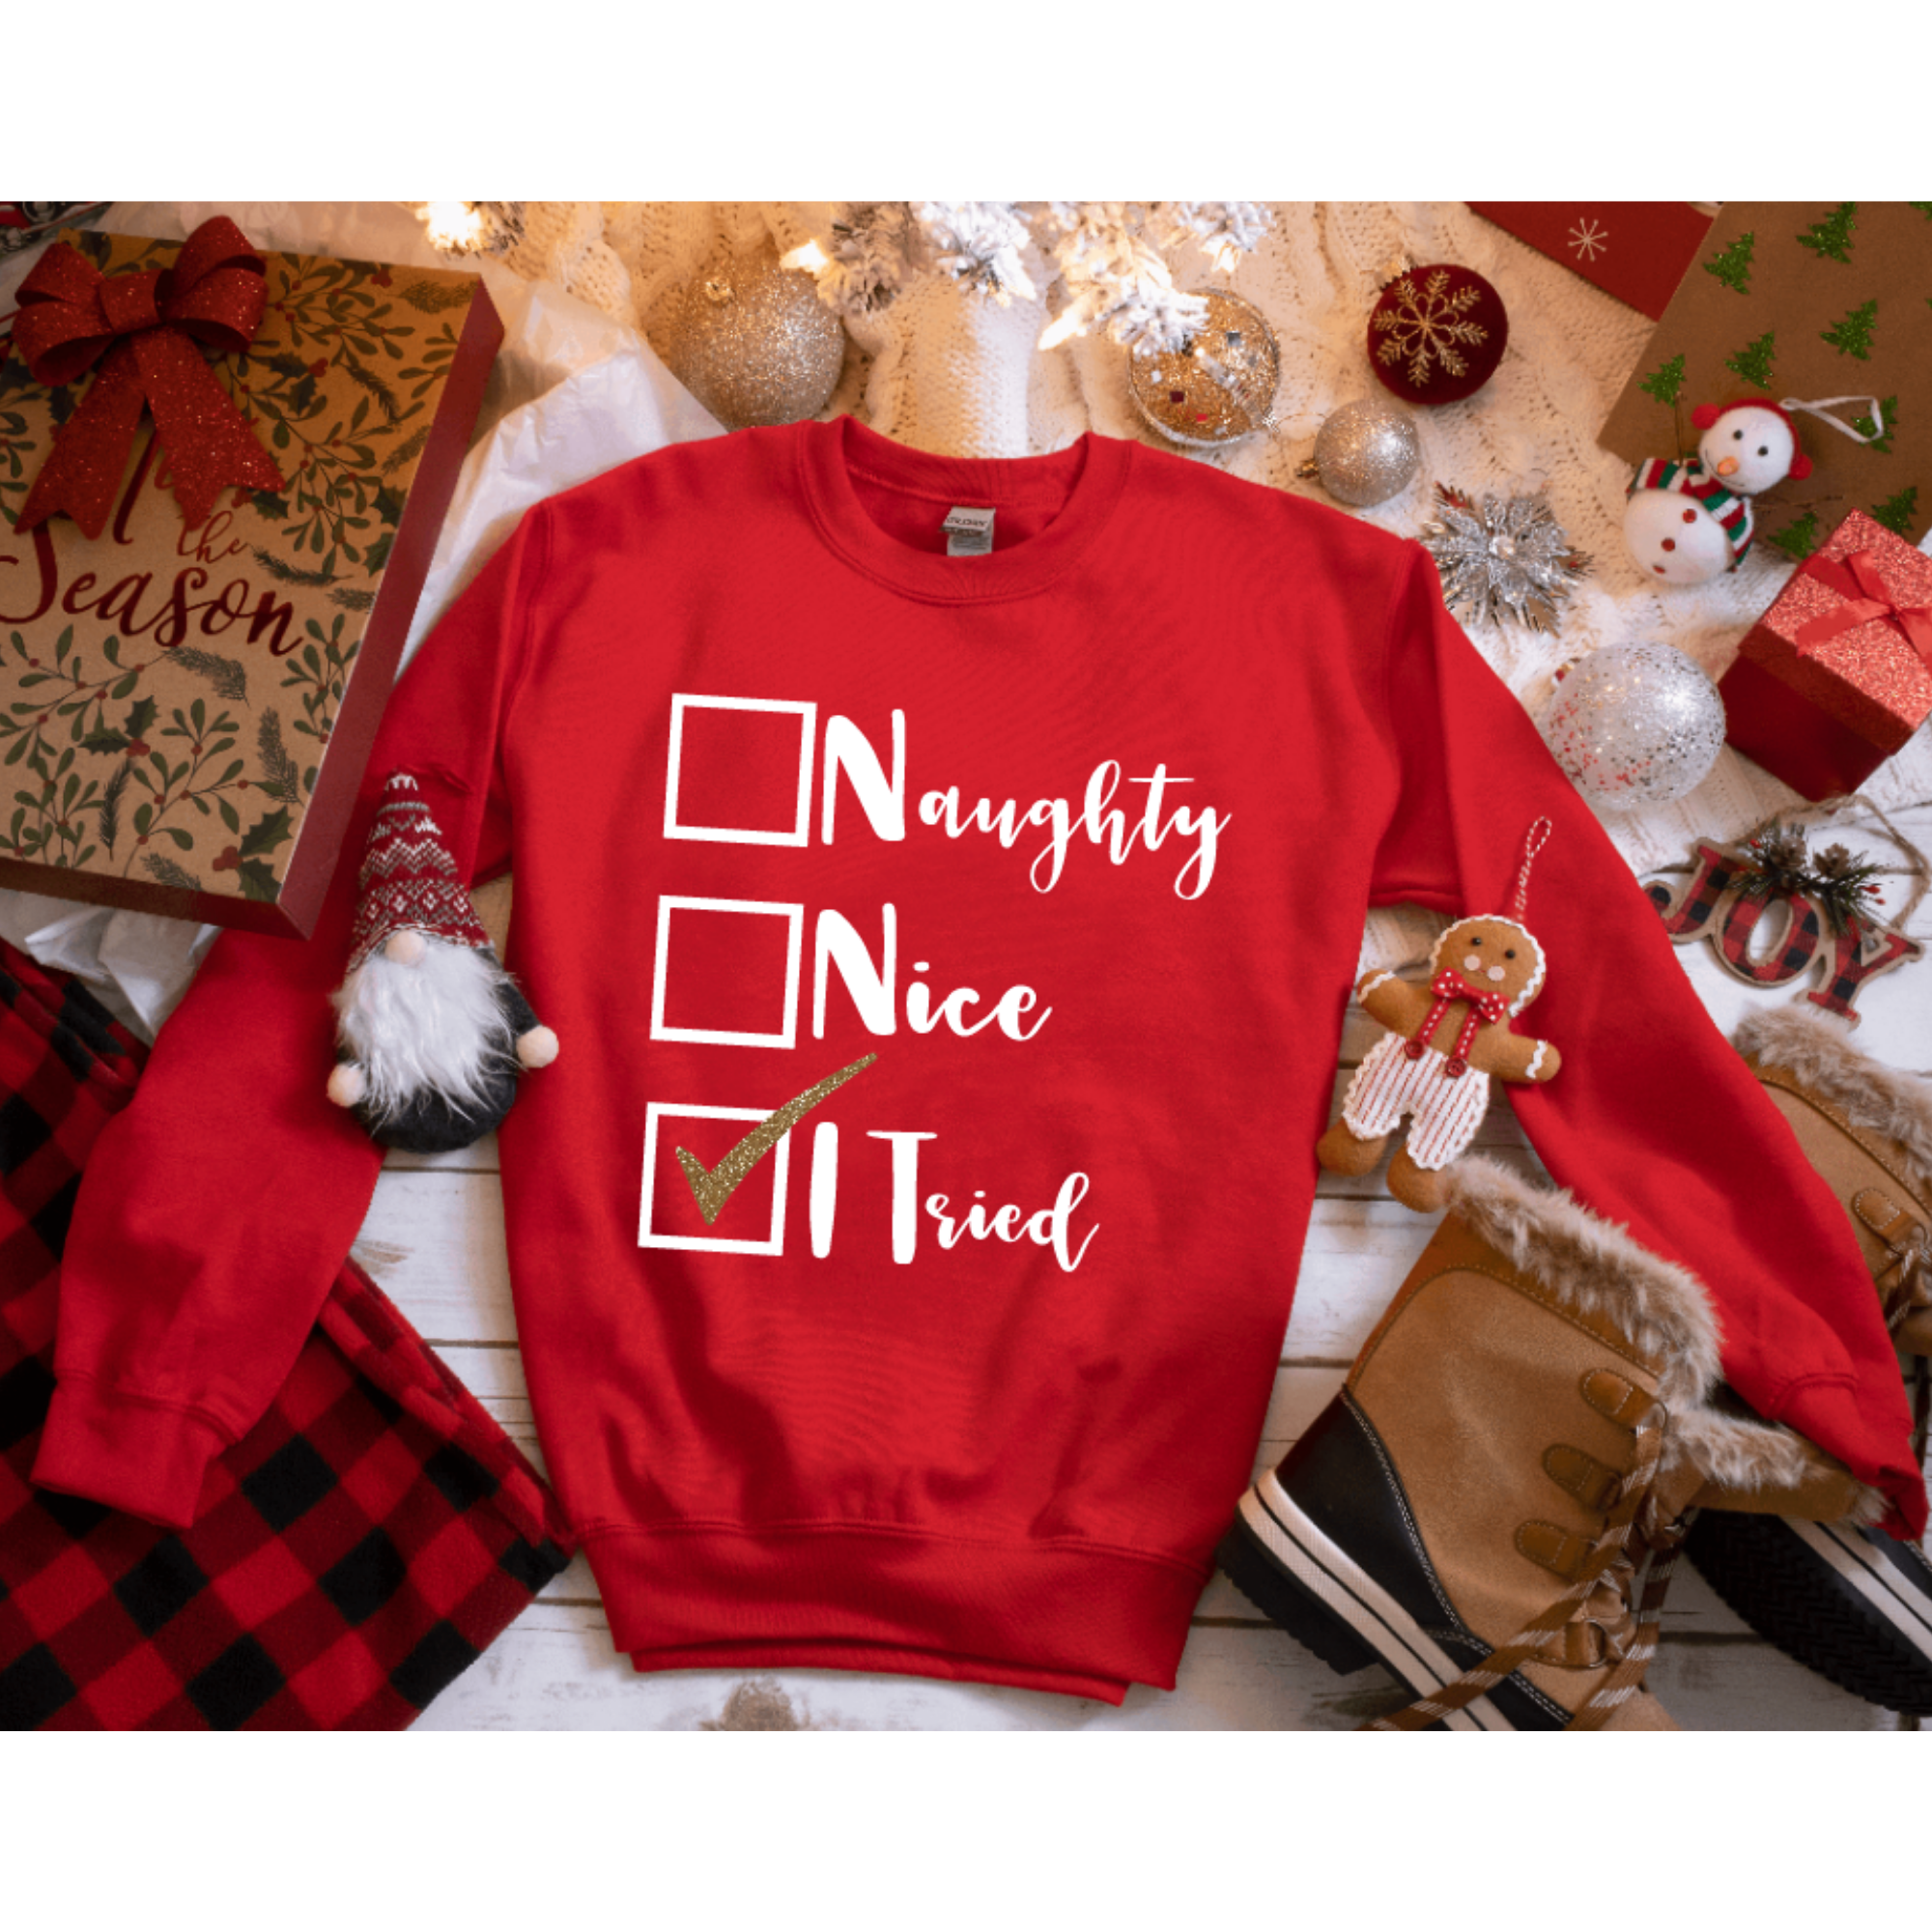 Naughty Nice I Tried Shirt / Thanksgiving Shirt / Funny Holiday Tee / Holiday Sweater / Christmas Sweater